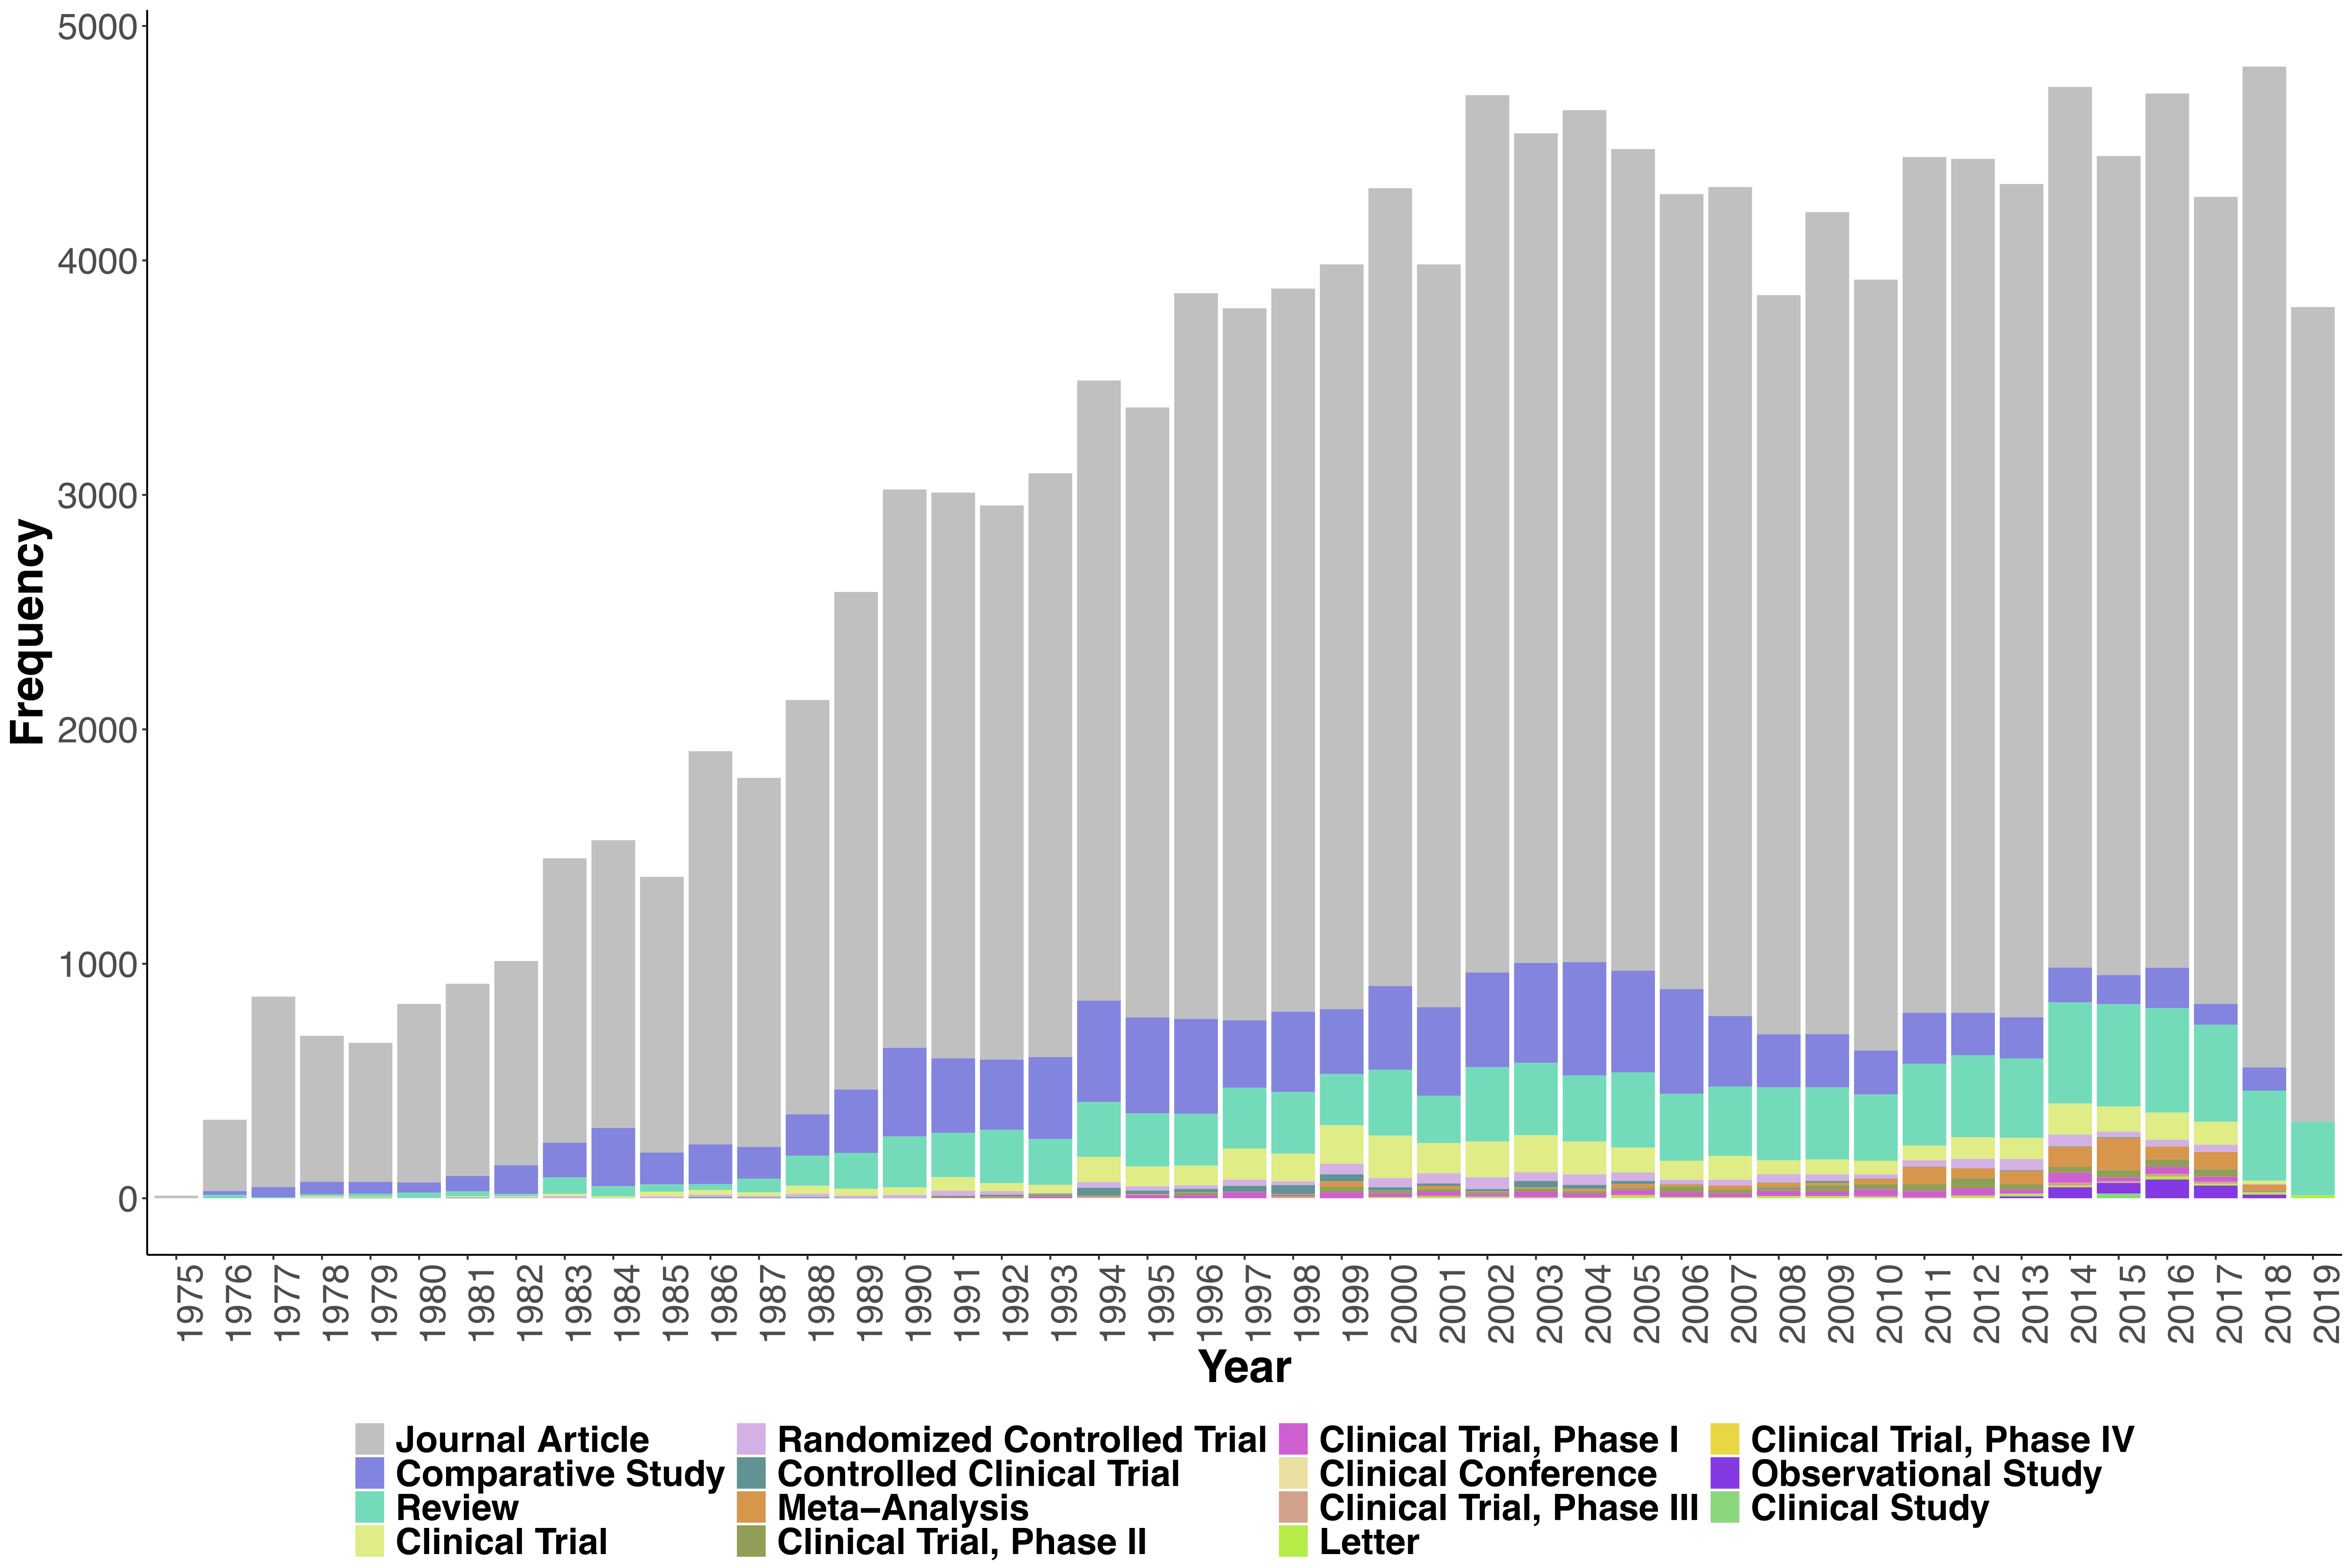 PubMed articles per year